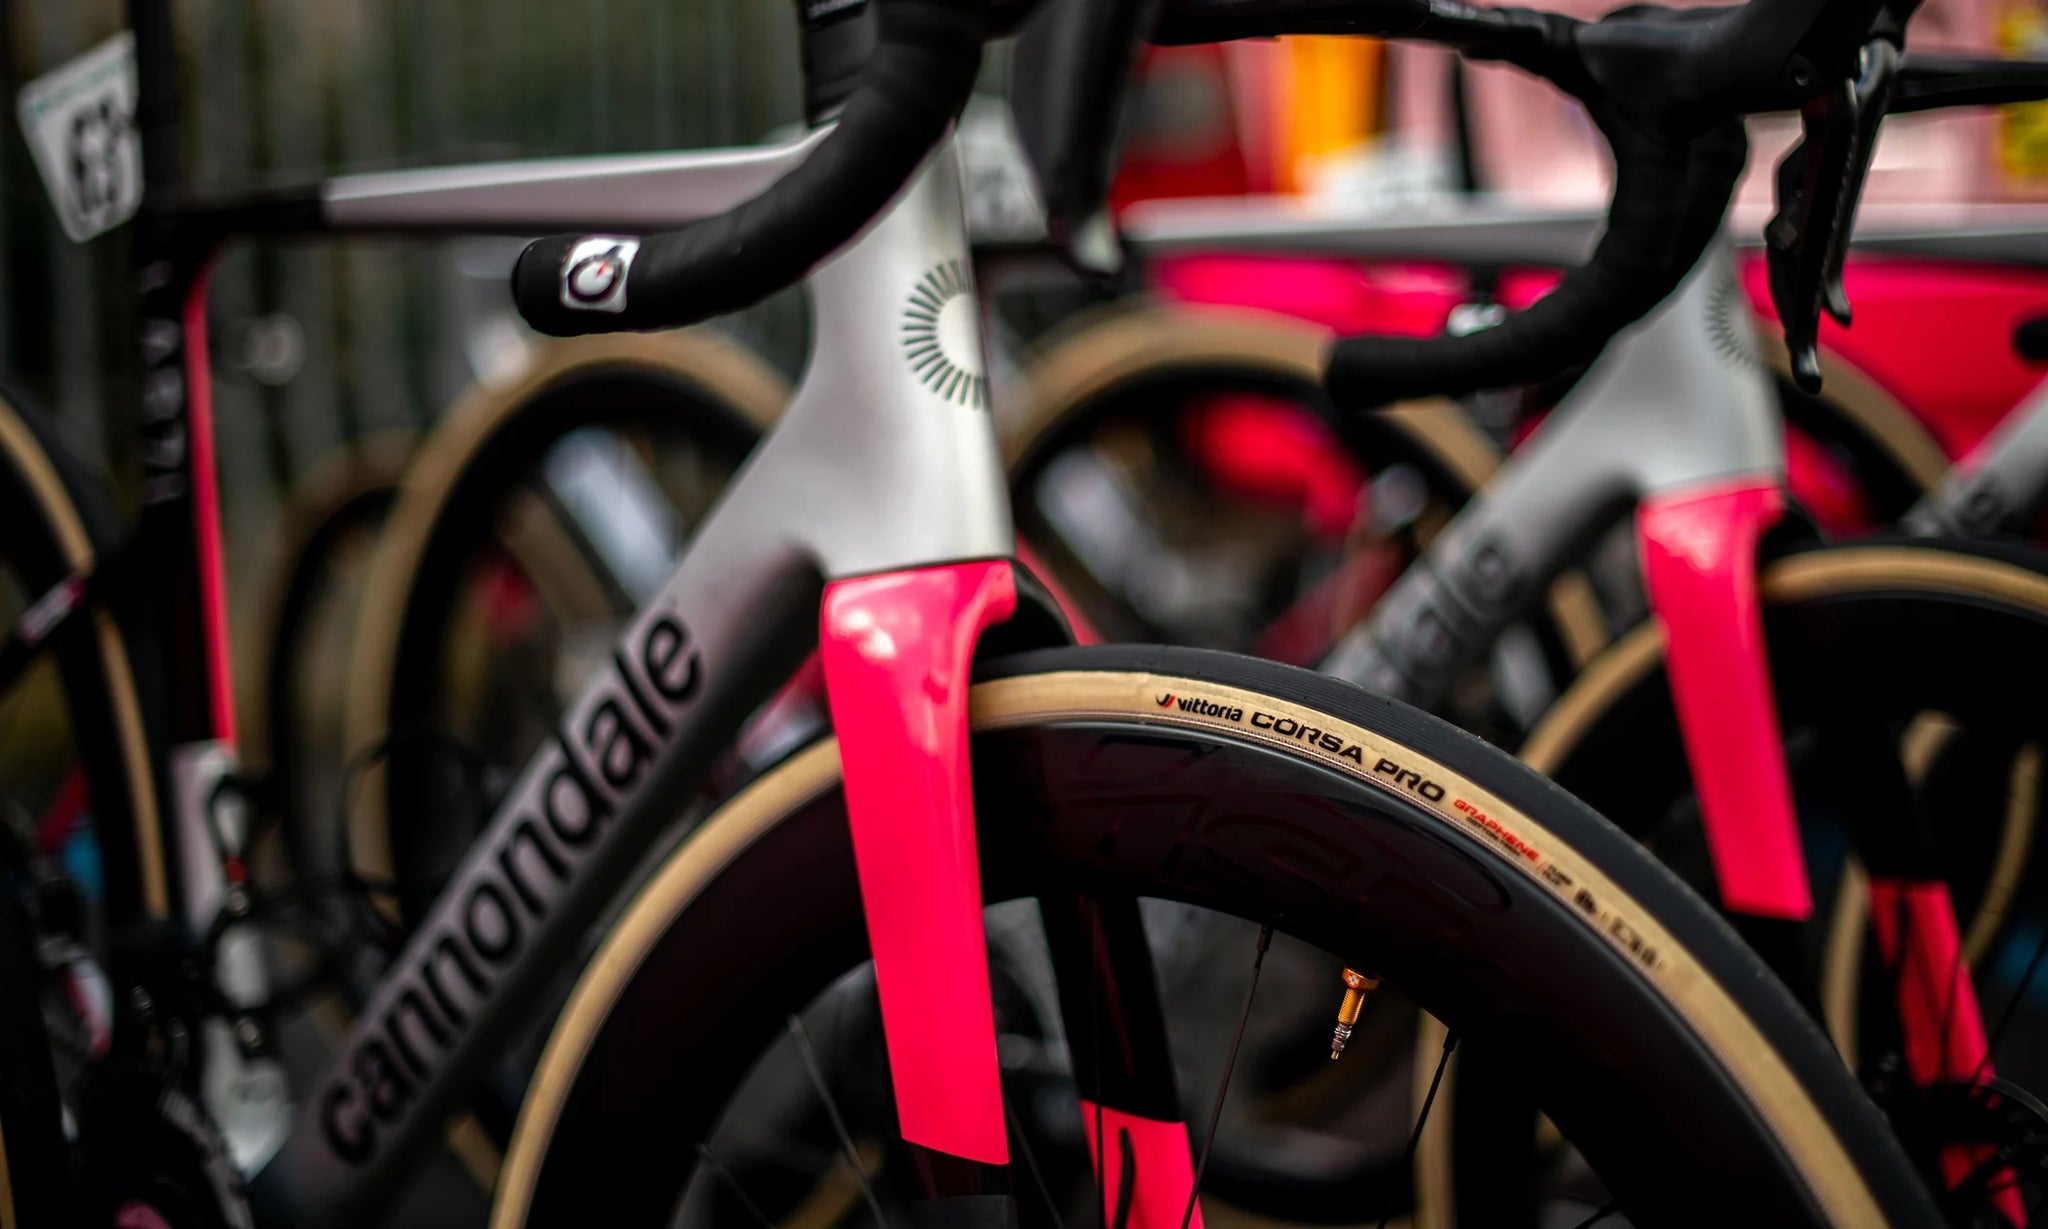 Unpack This: The Tubeless Tires Winning at the Tour de France